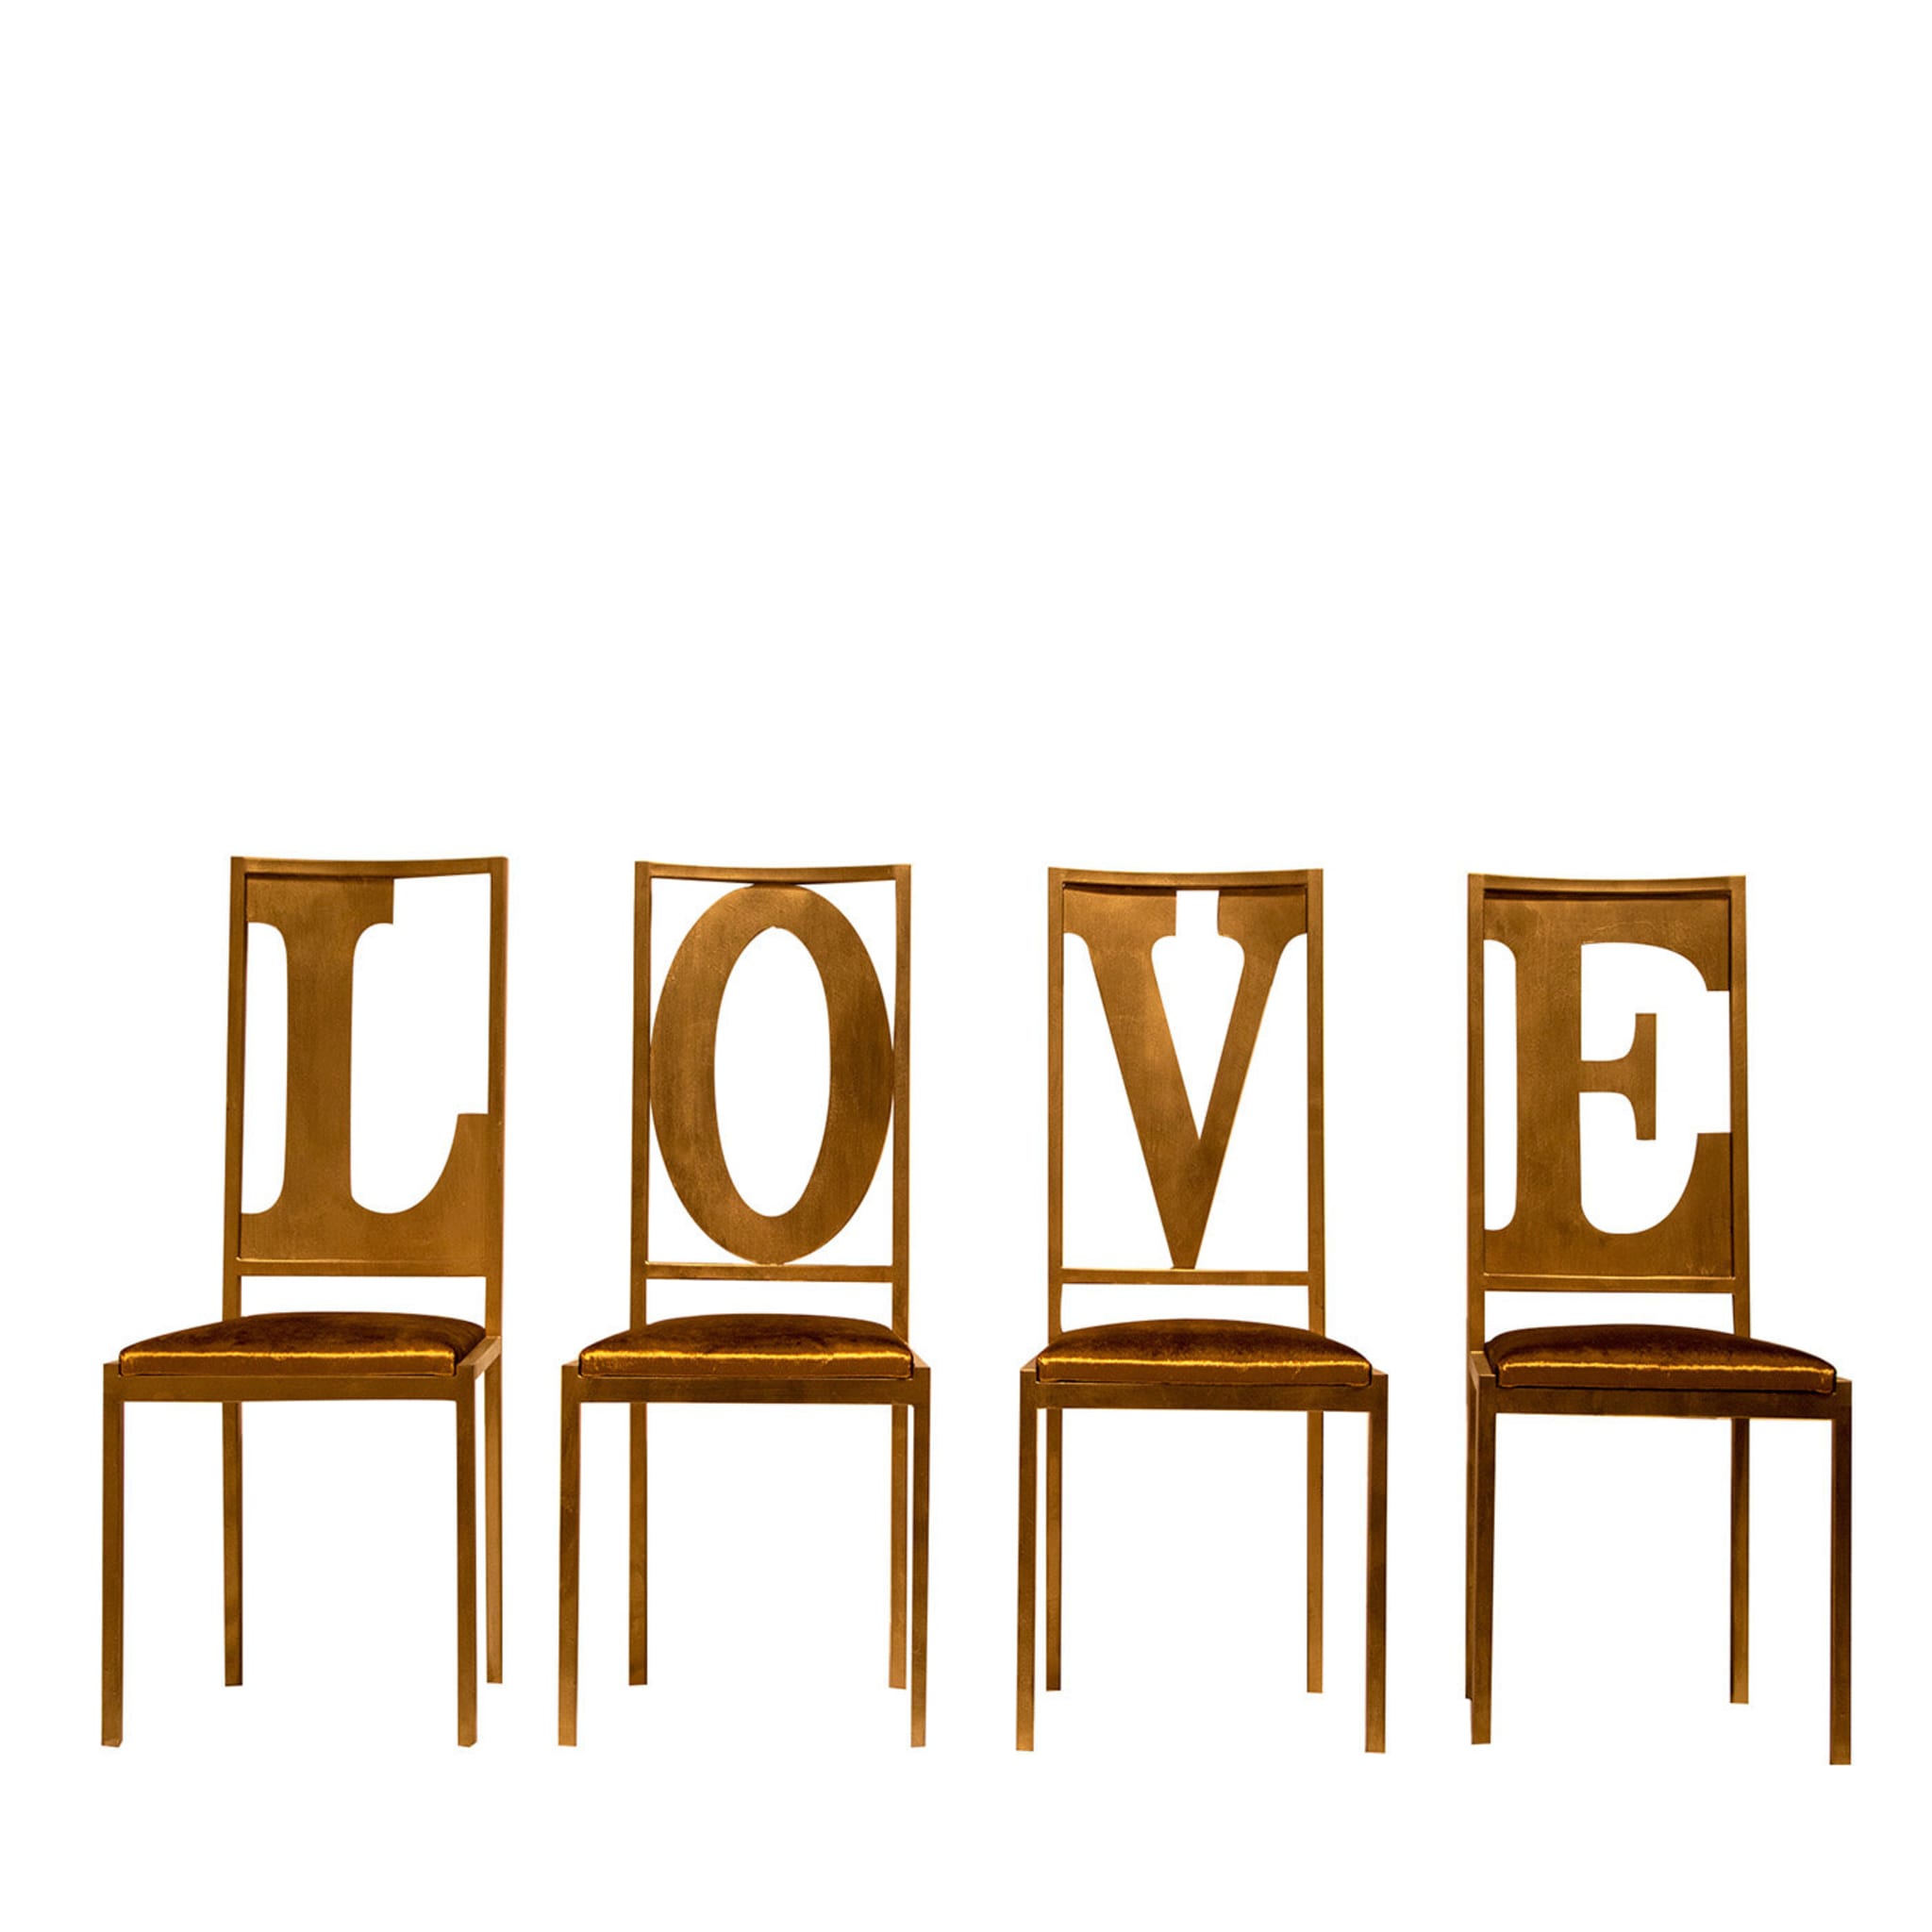 Gold Love Set of 4 Letter Chairs - Main view